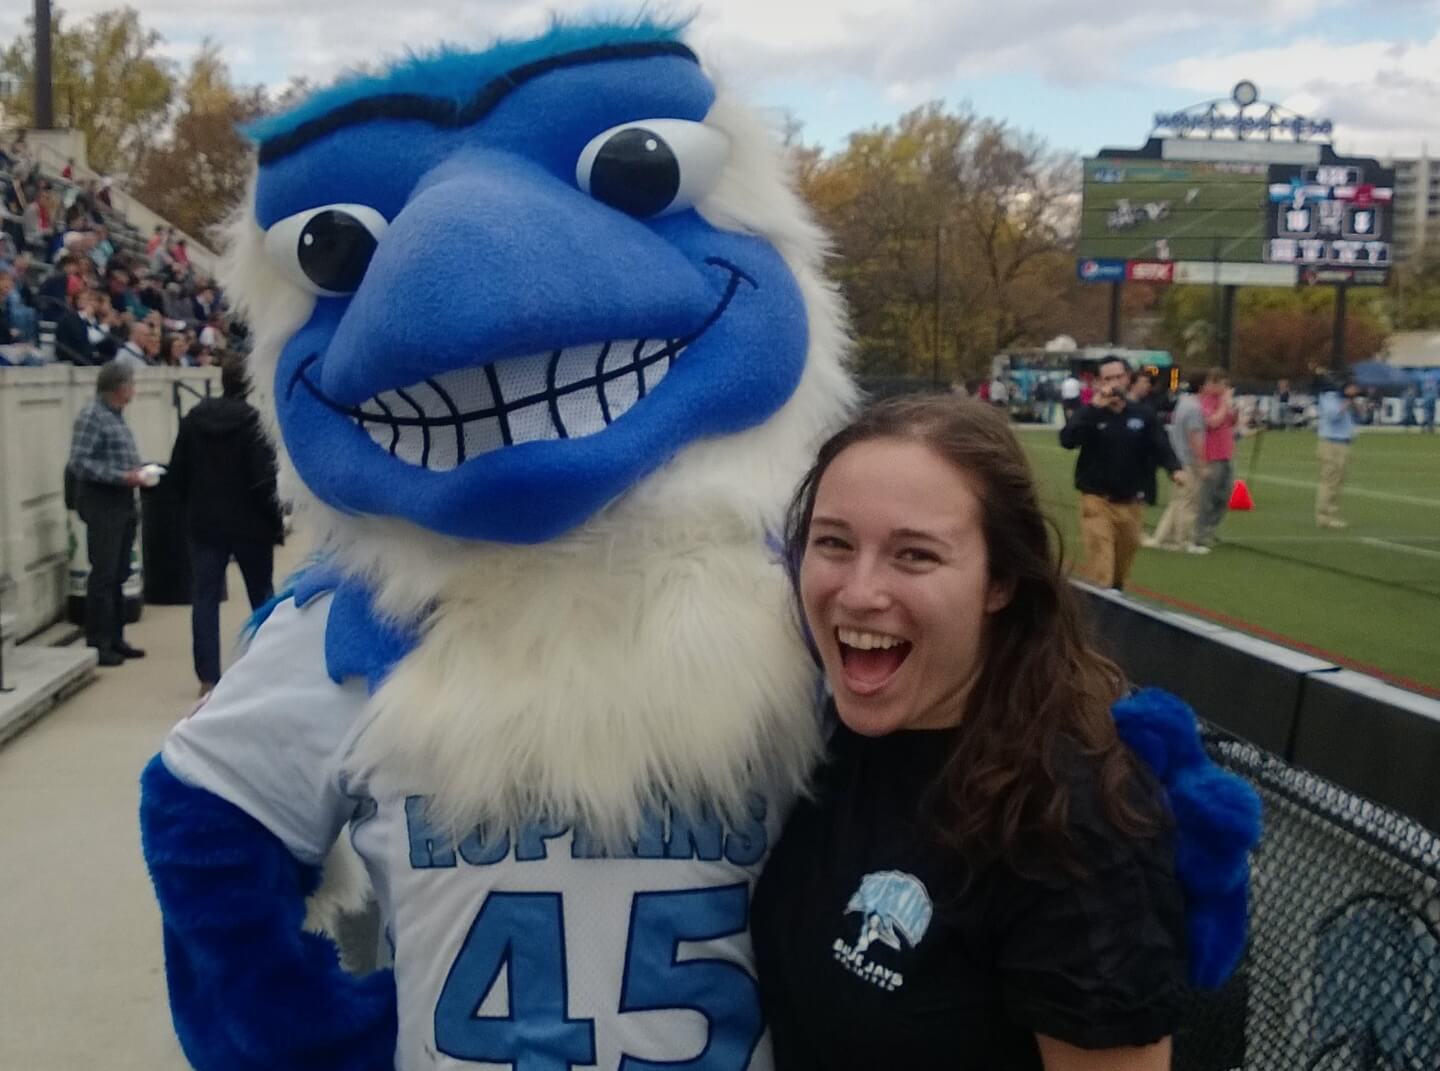 A Hopkins student poses with the Blue Jay mascot during a lacrosse game at Homewood stadium